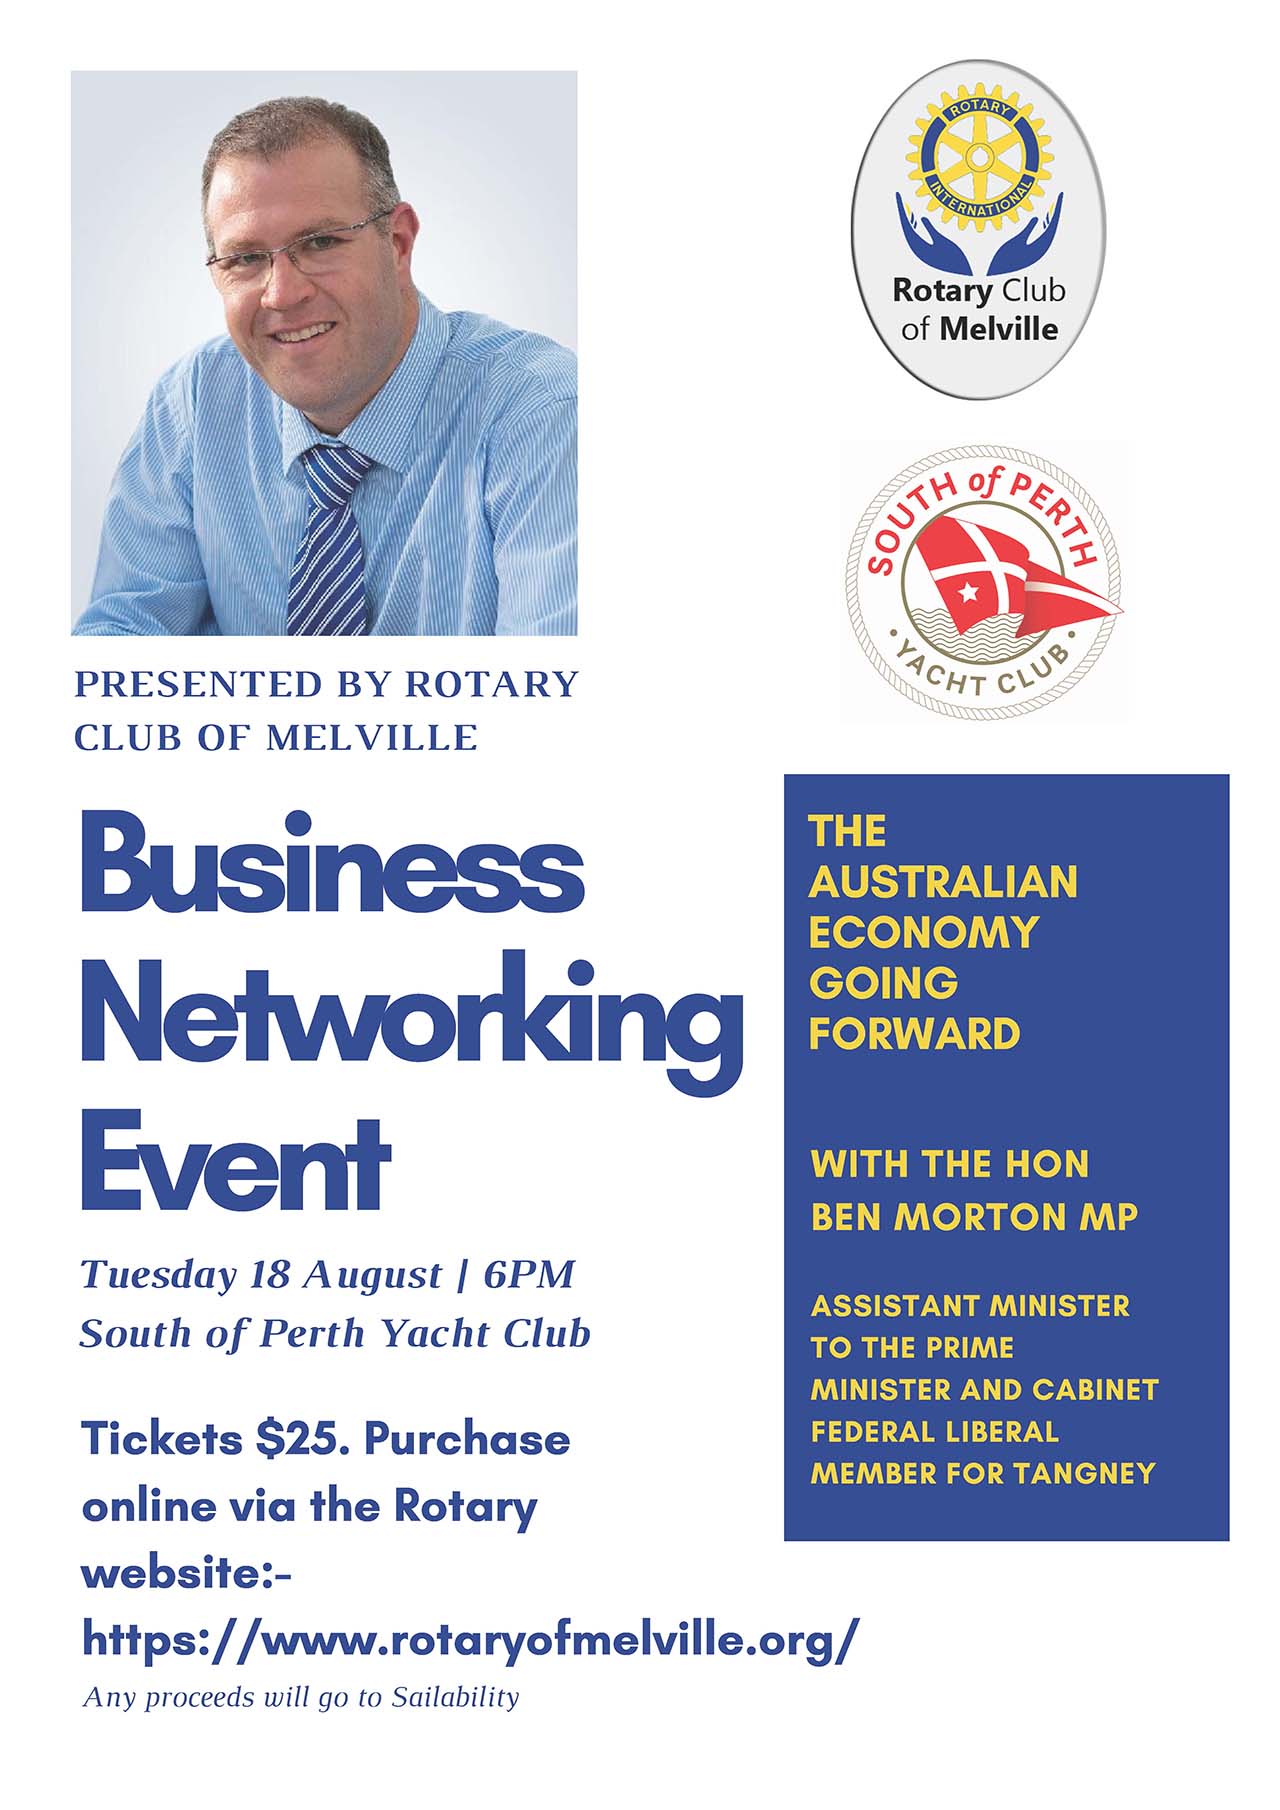 Business Networking Event with the Hon Ben Morton MP